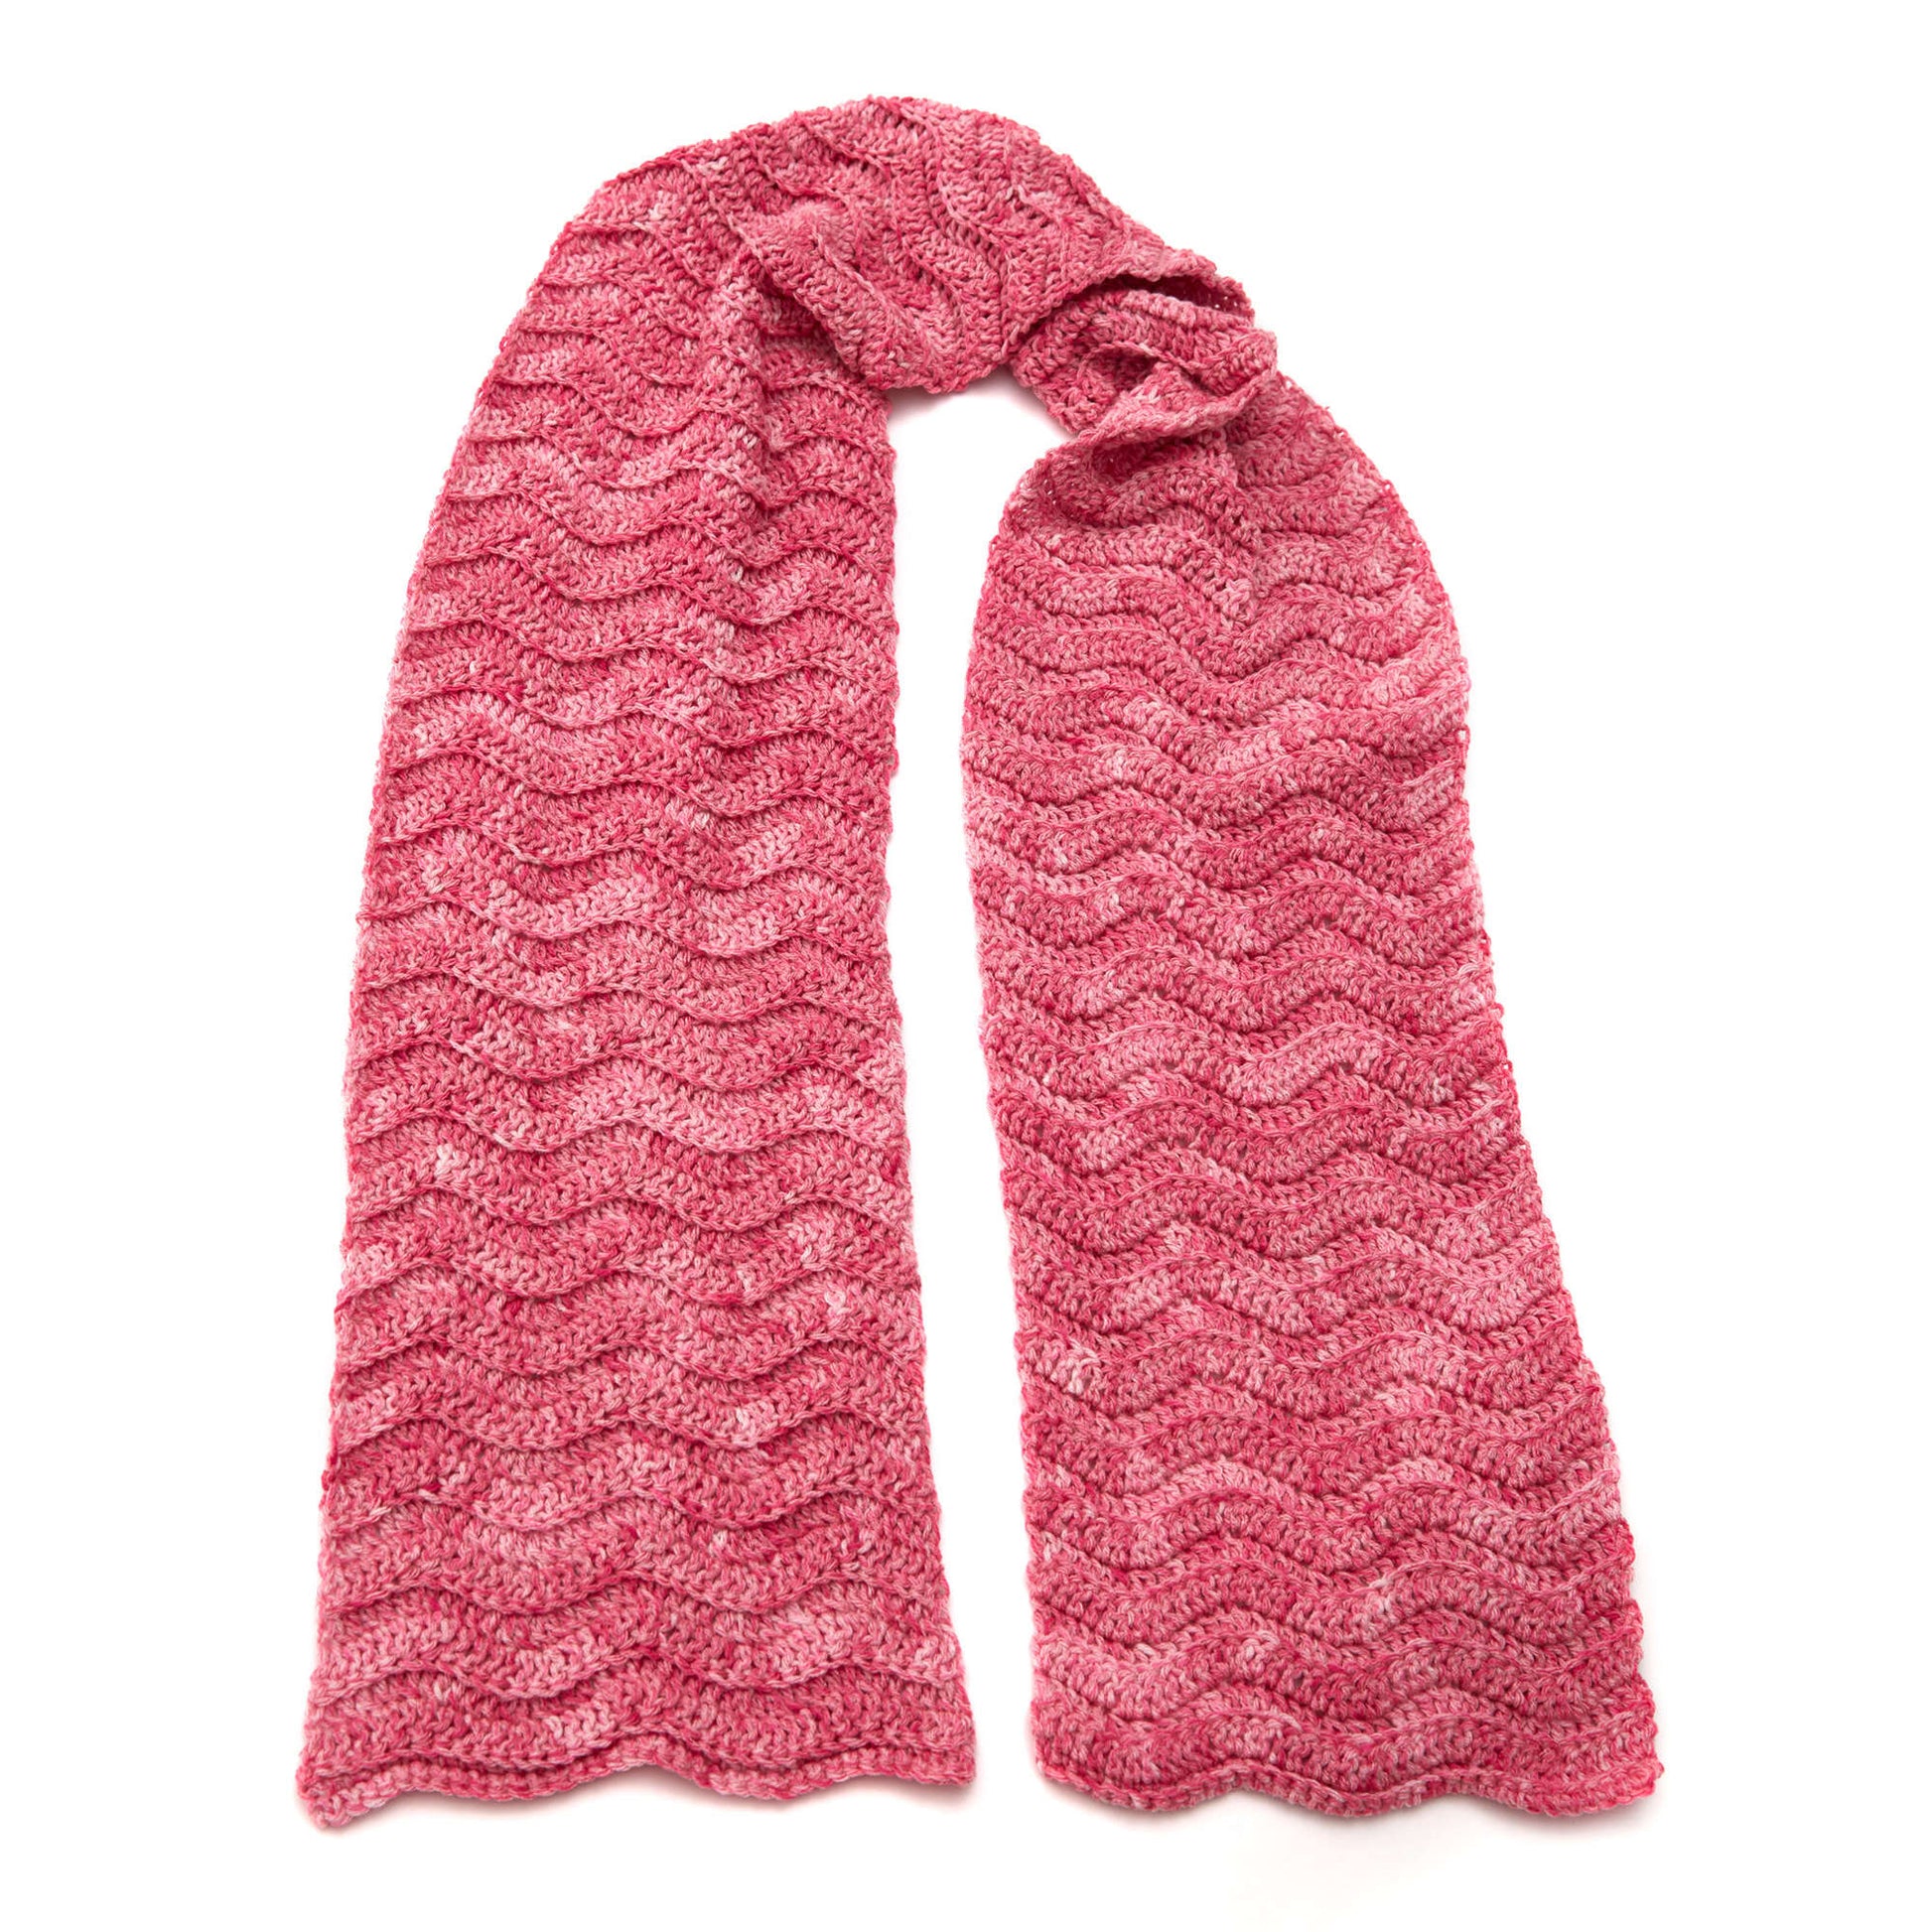 Free Red Heart Crochet Speckled Super Scarf Pattern